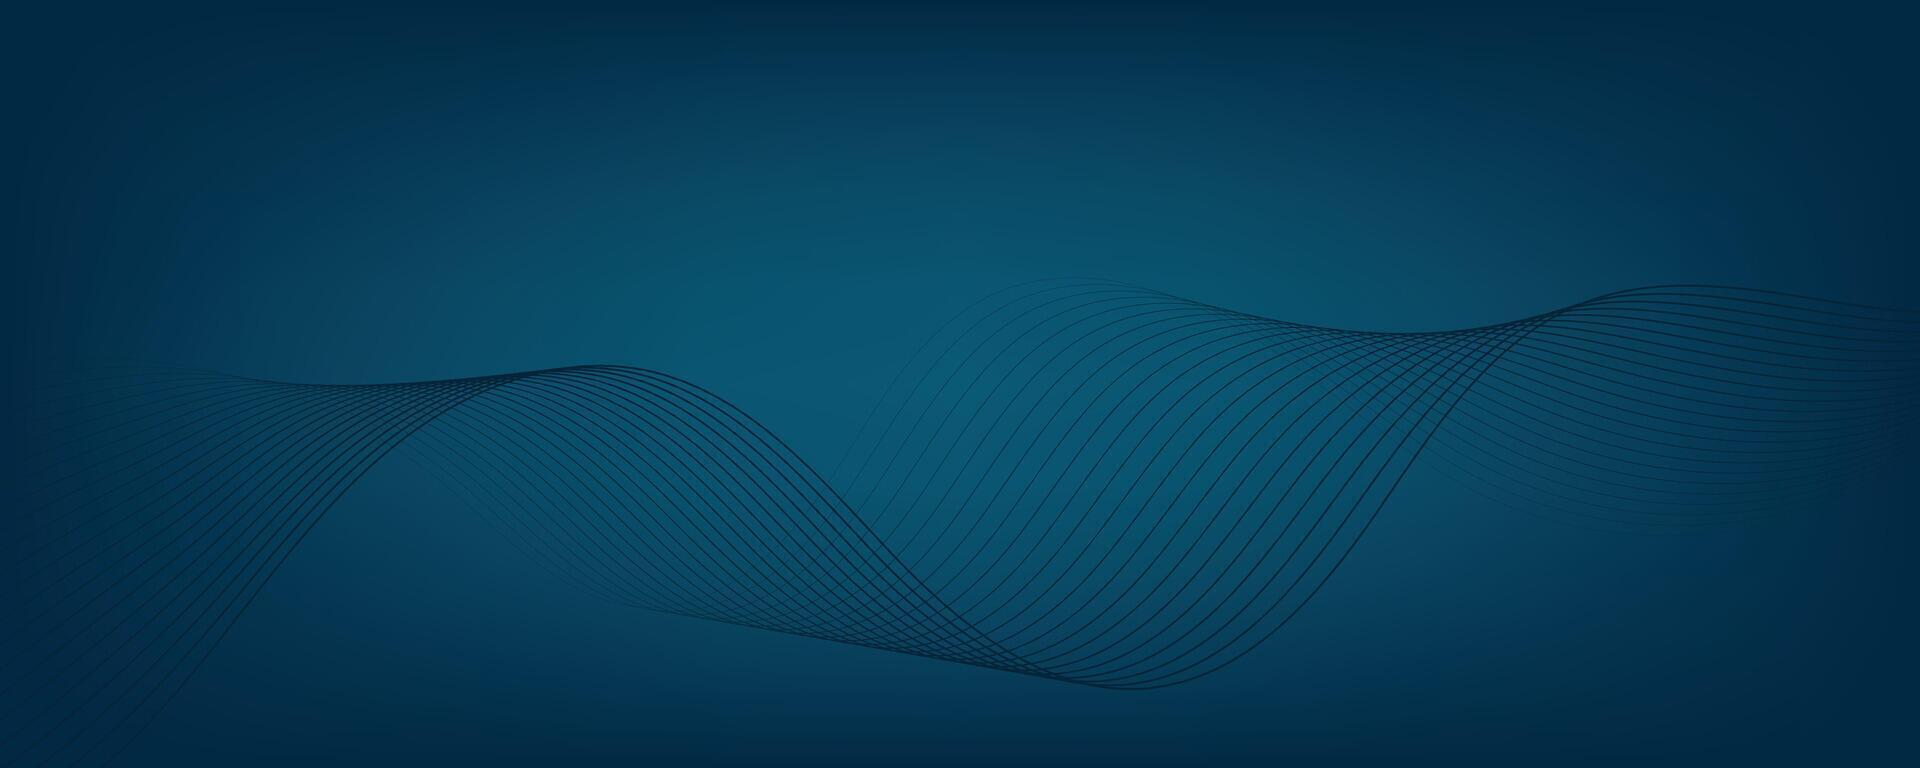 Abstract blue gradient background with waves. EPS10 vector